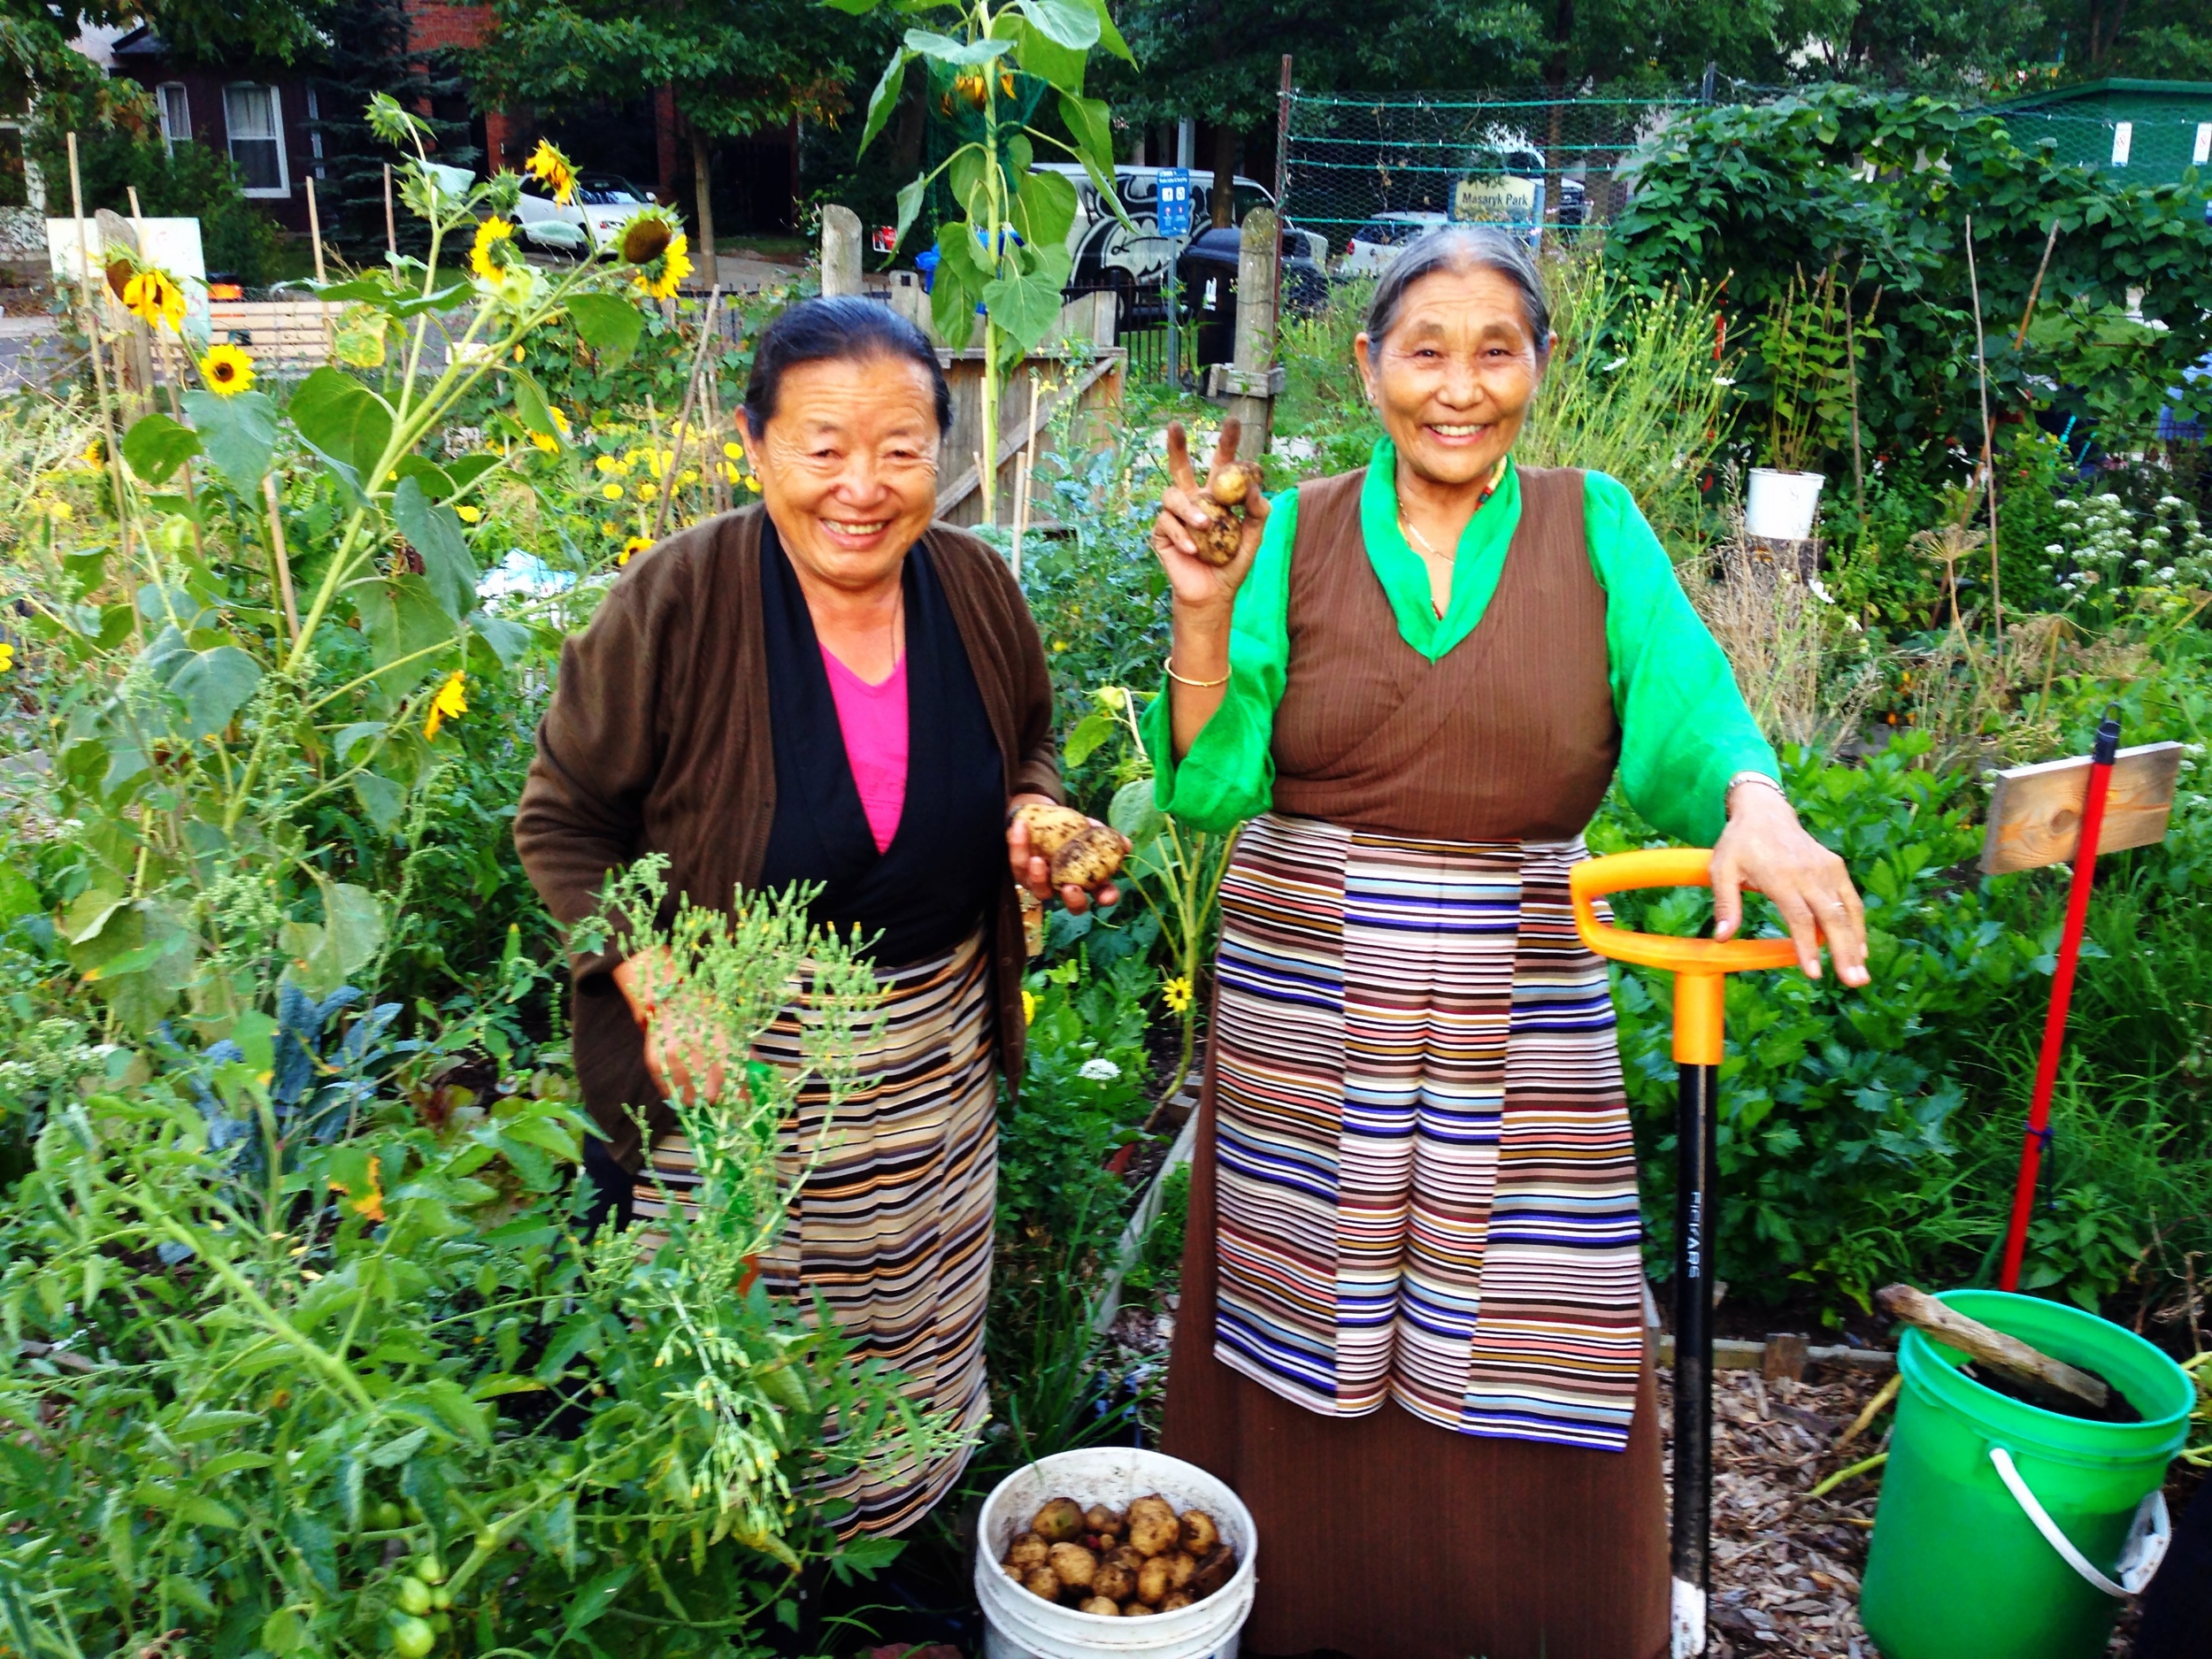  Two women standing in front of garden plots with a bucket of potatoes and smiling 